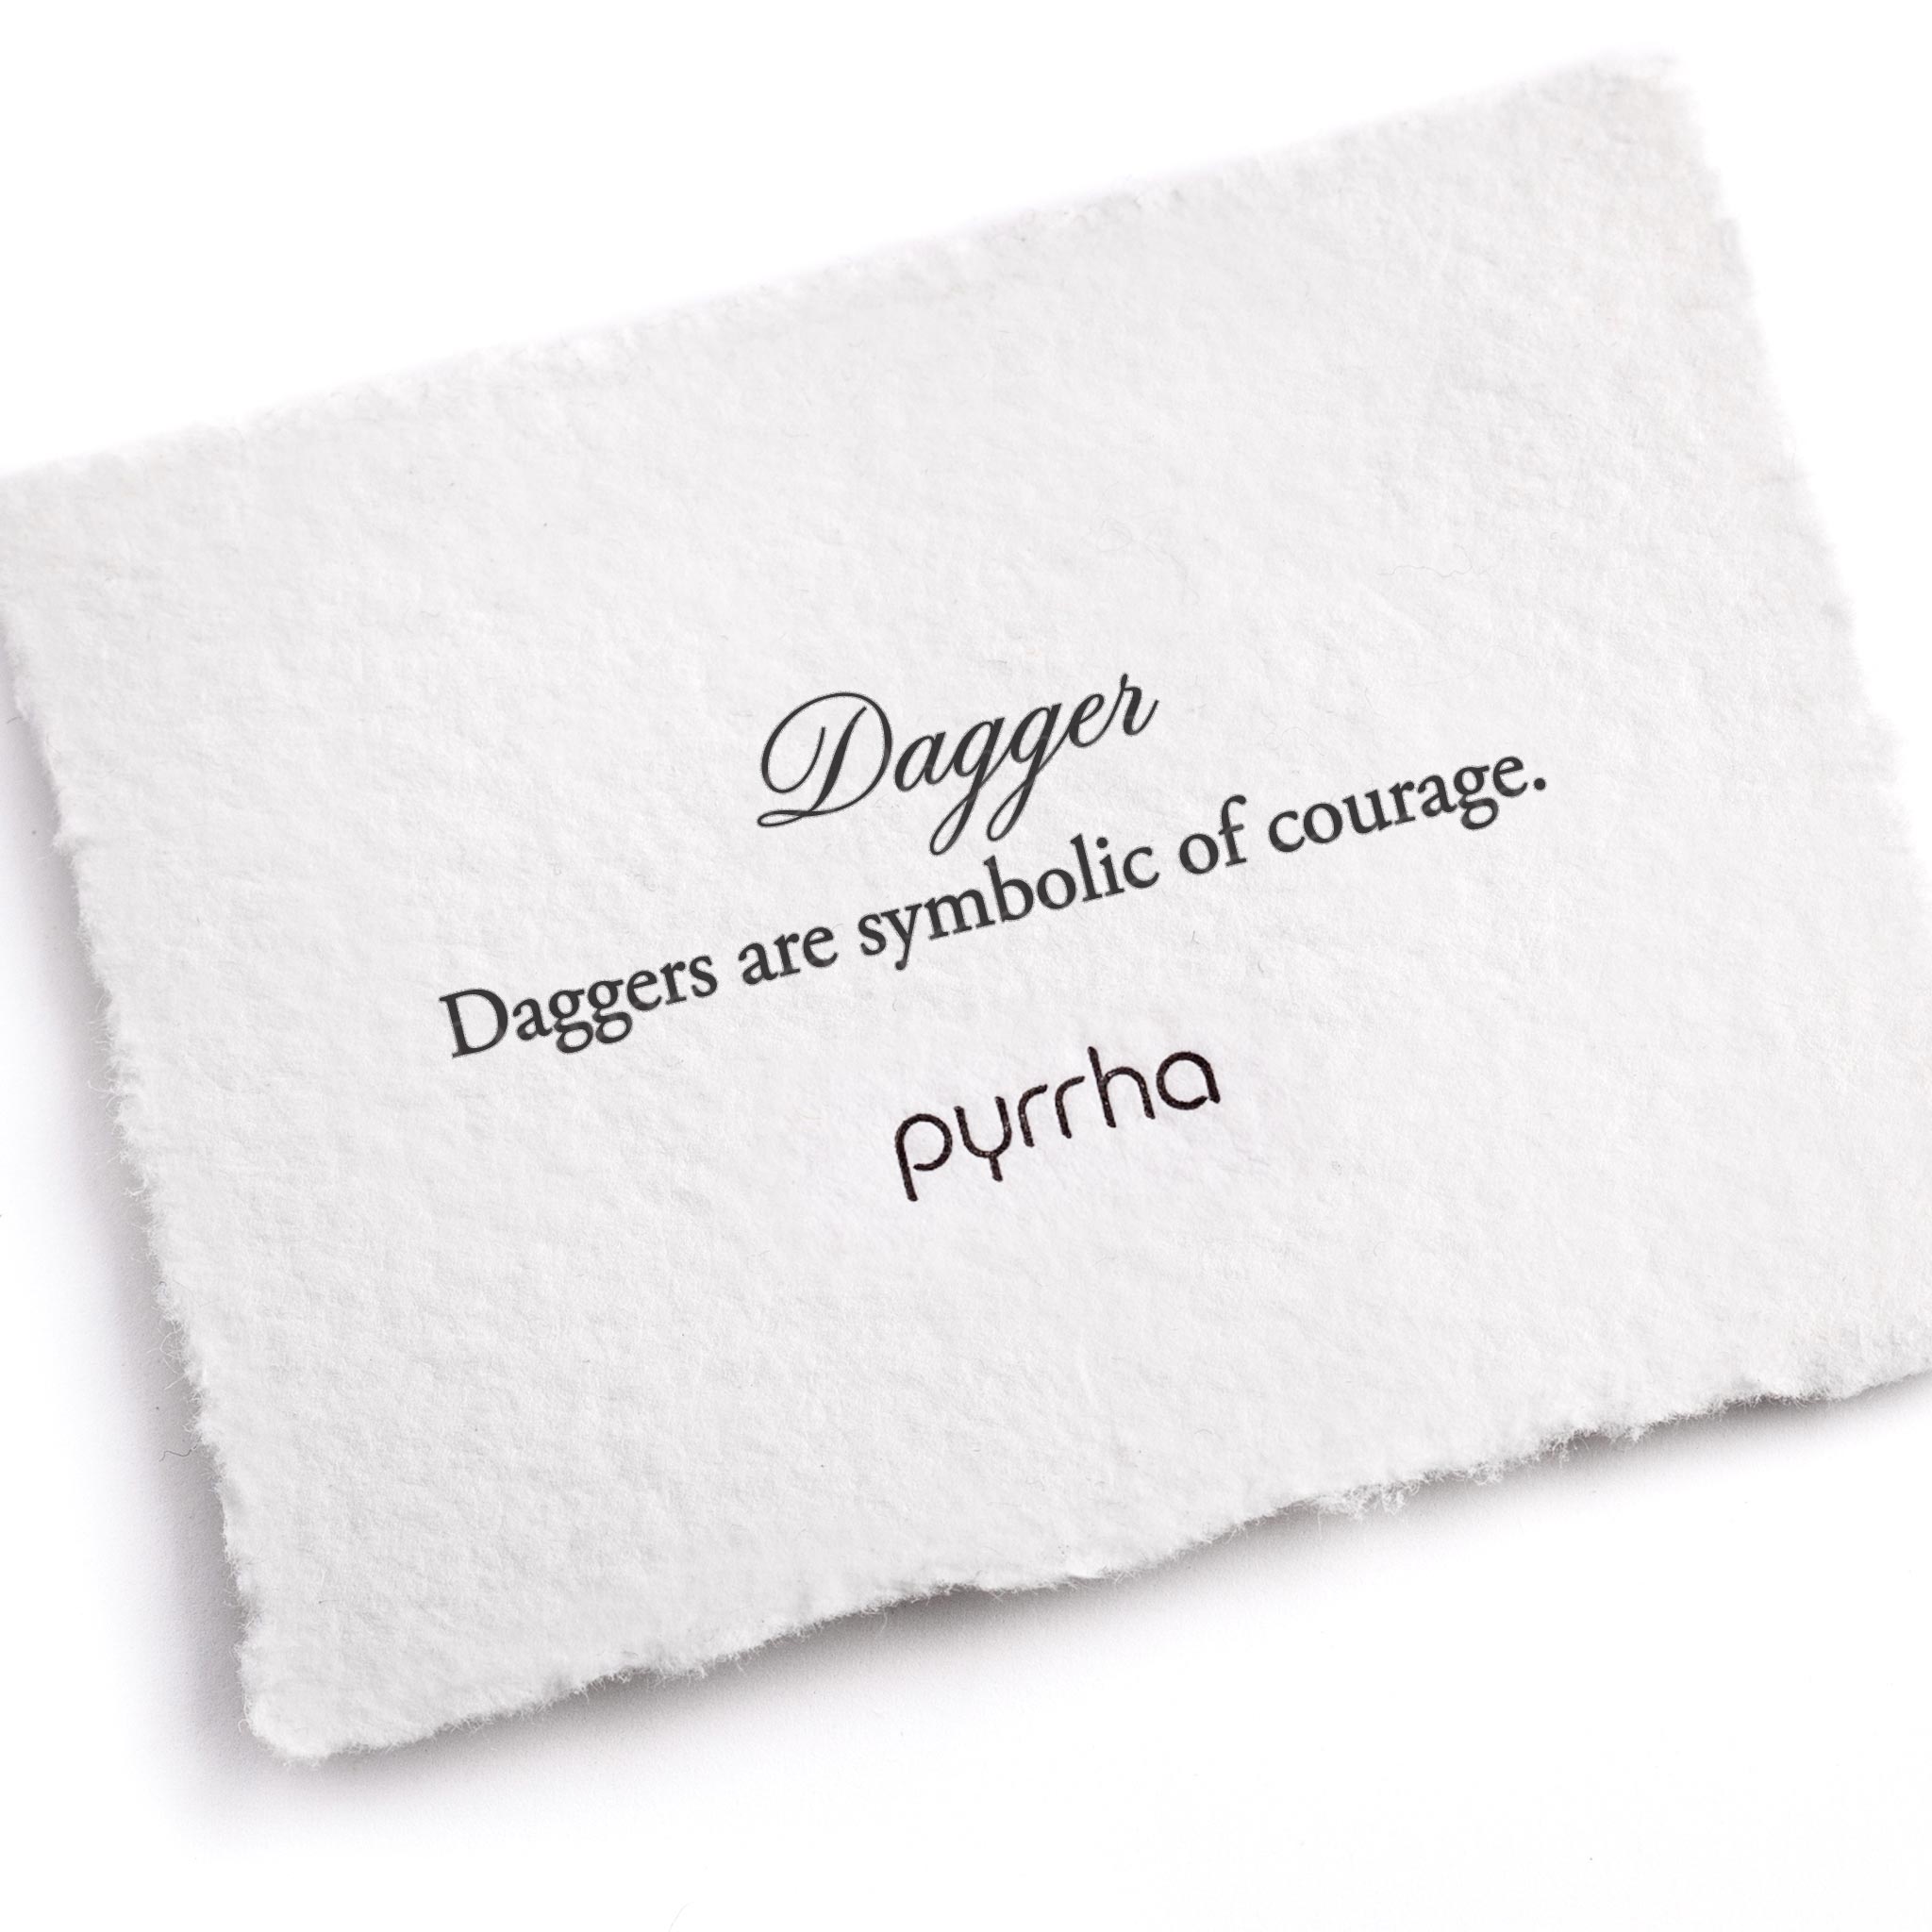 A handtorn cotton card describing the meaning for our Dagger 14K Gold Symbol Charm Bracelet.